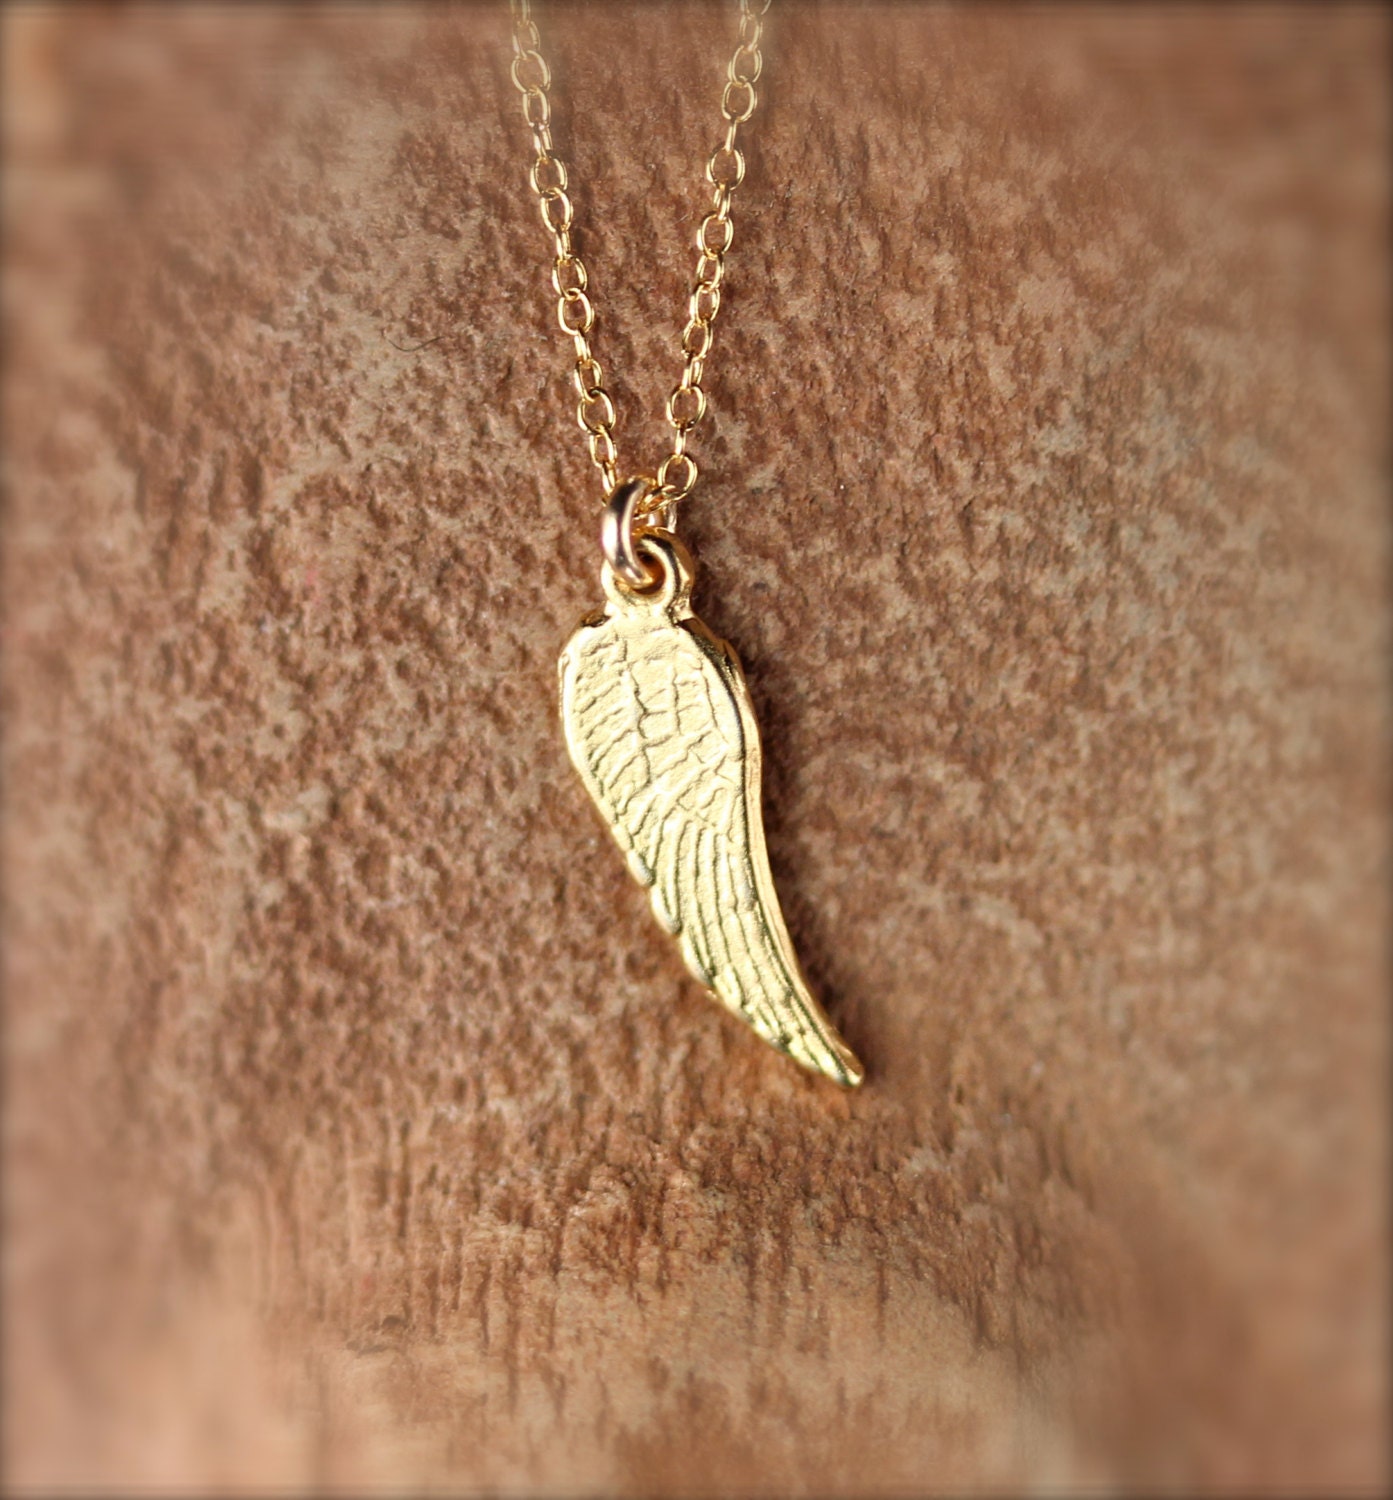 Tiny gold wing necklace - angel wing necklace - guardian angel wing ...